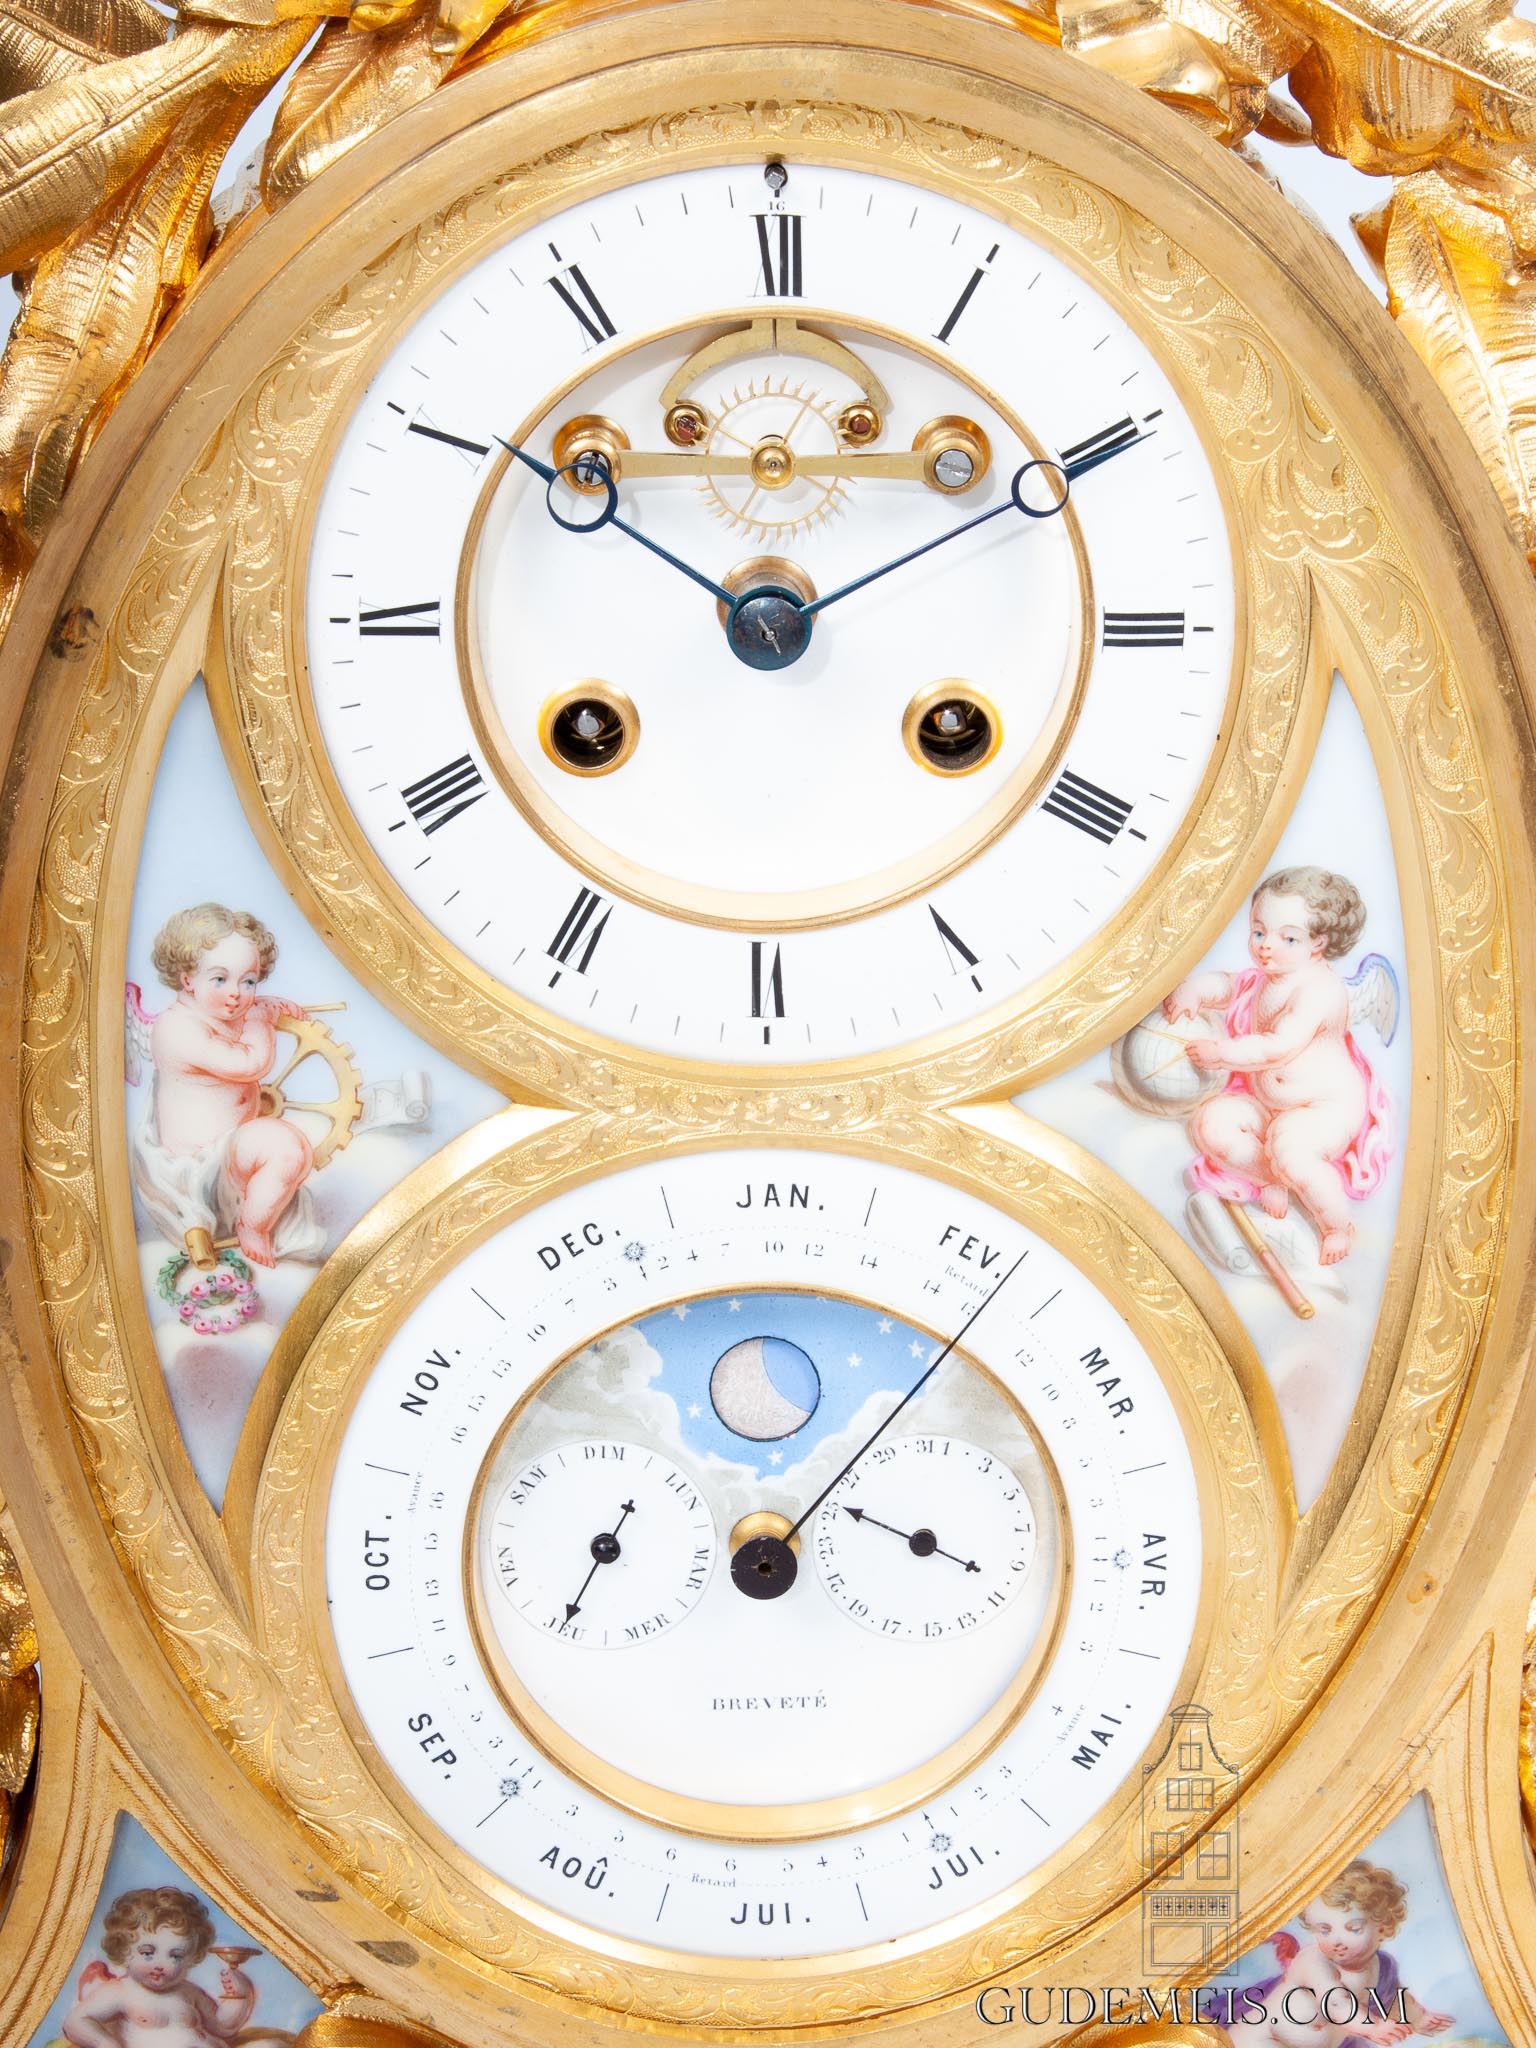 French-Napoleon III-rococo-style-sevres-porcelain-perpetual-calendar-moon phase-date-month-year-Brocot-antique-mantel-clock-